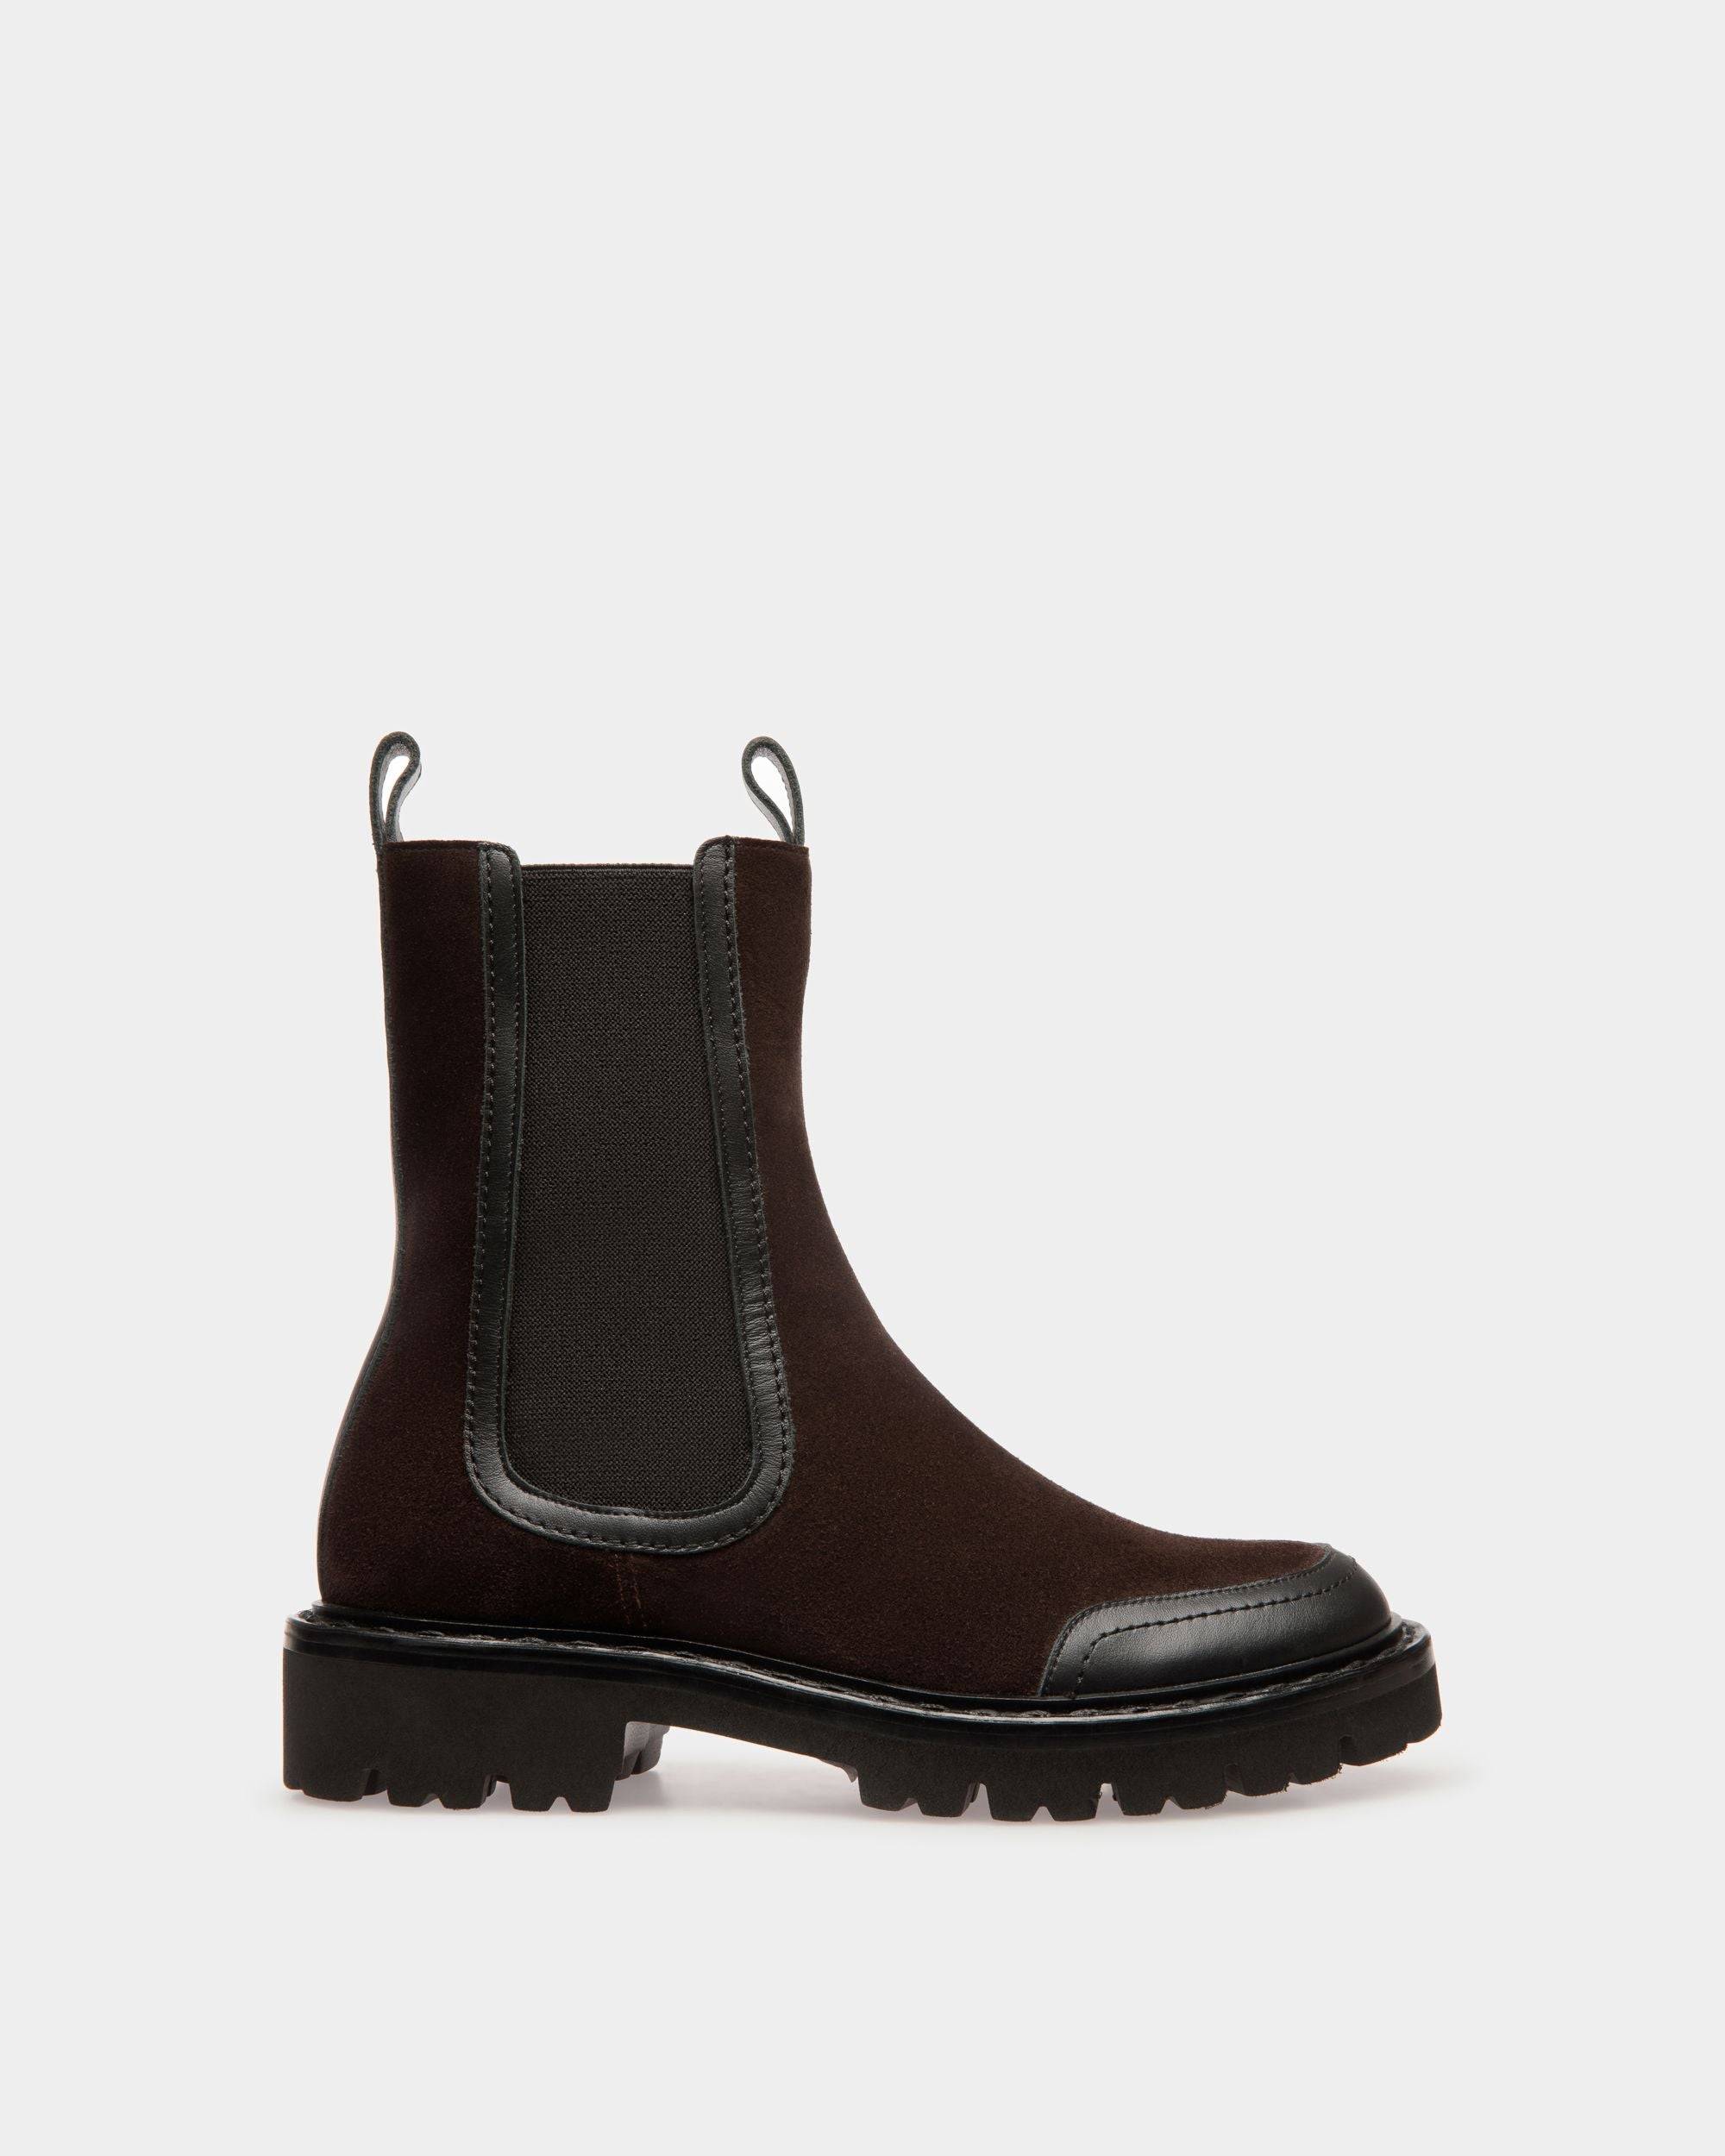 Women's Enga Boots In Brown Leather | Bally | Still Life Side